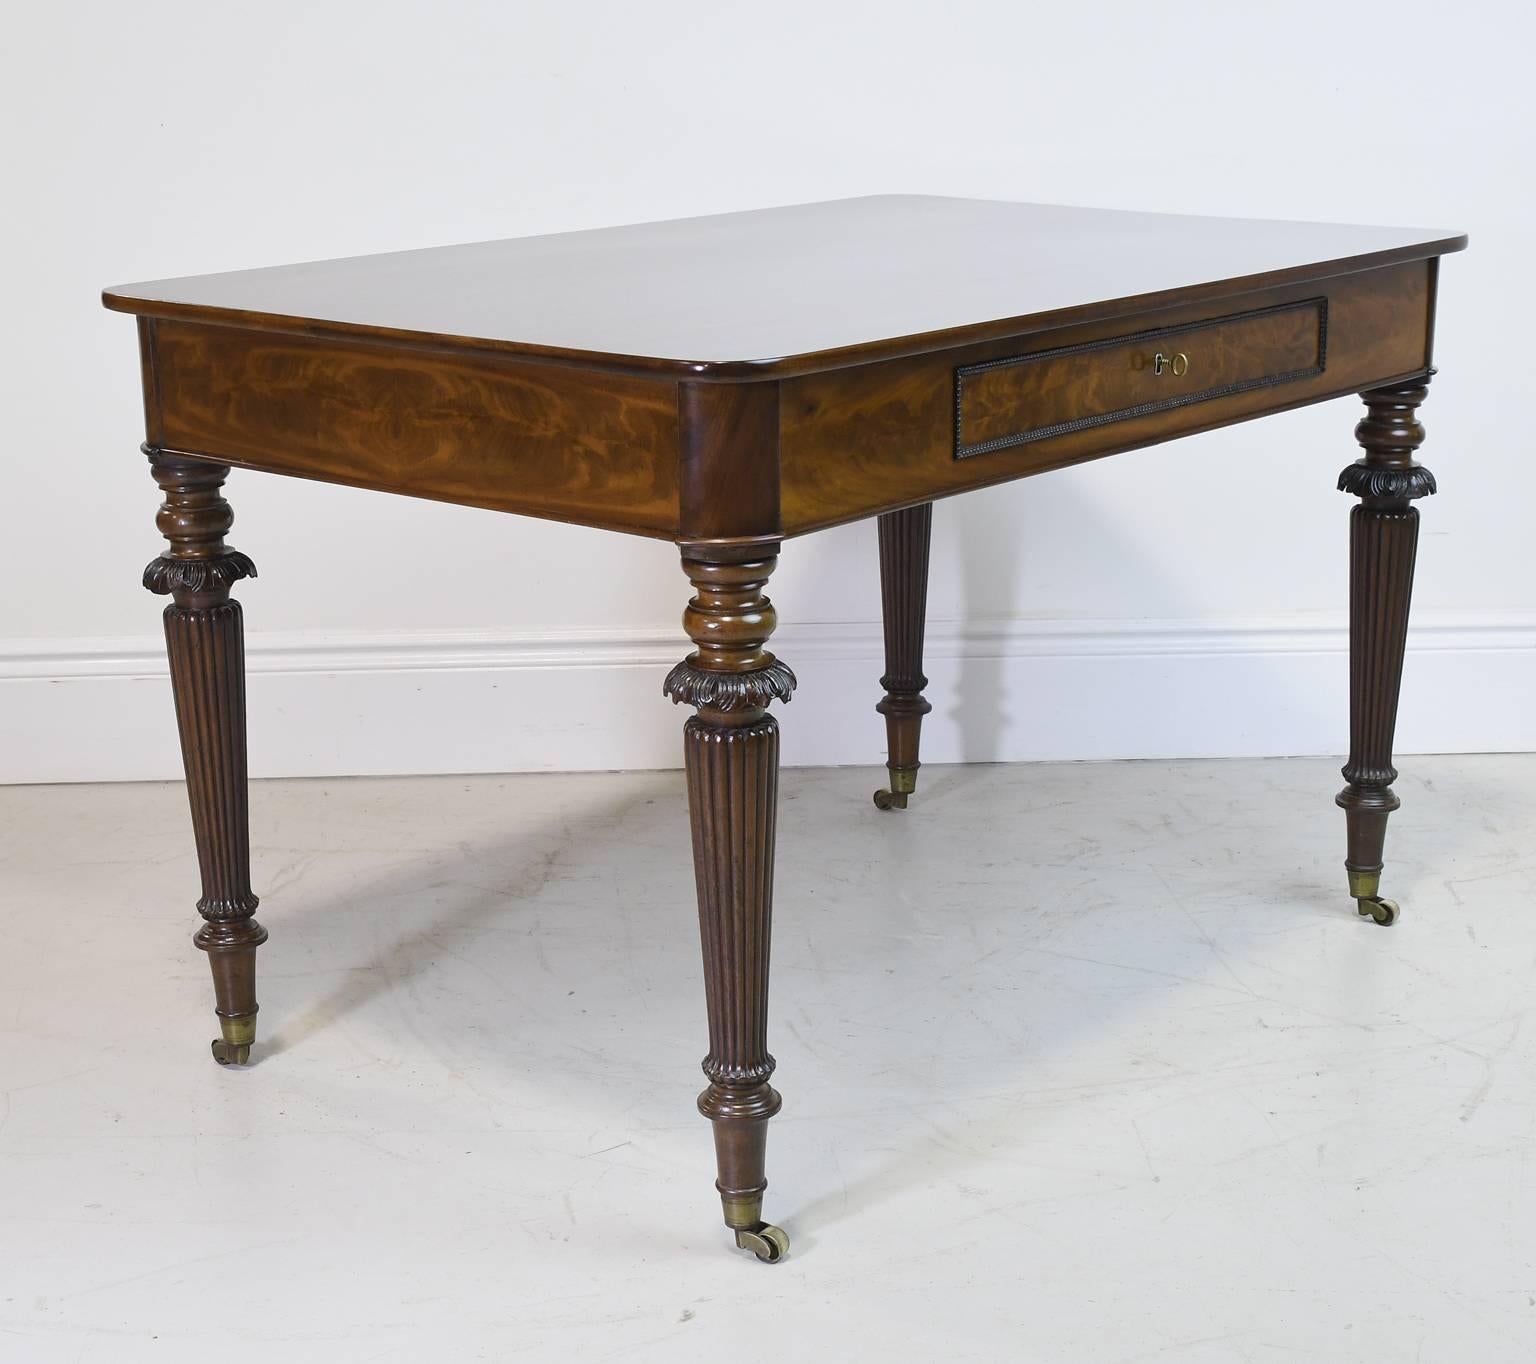 A very beautiful and functional writing desk with lovely proportions in West Indies (Cuban) mahogany on turned and reeded legs with foliate carving, and offering one long drawer, Denmark, circa 1835. French-polish finish, original lock with working